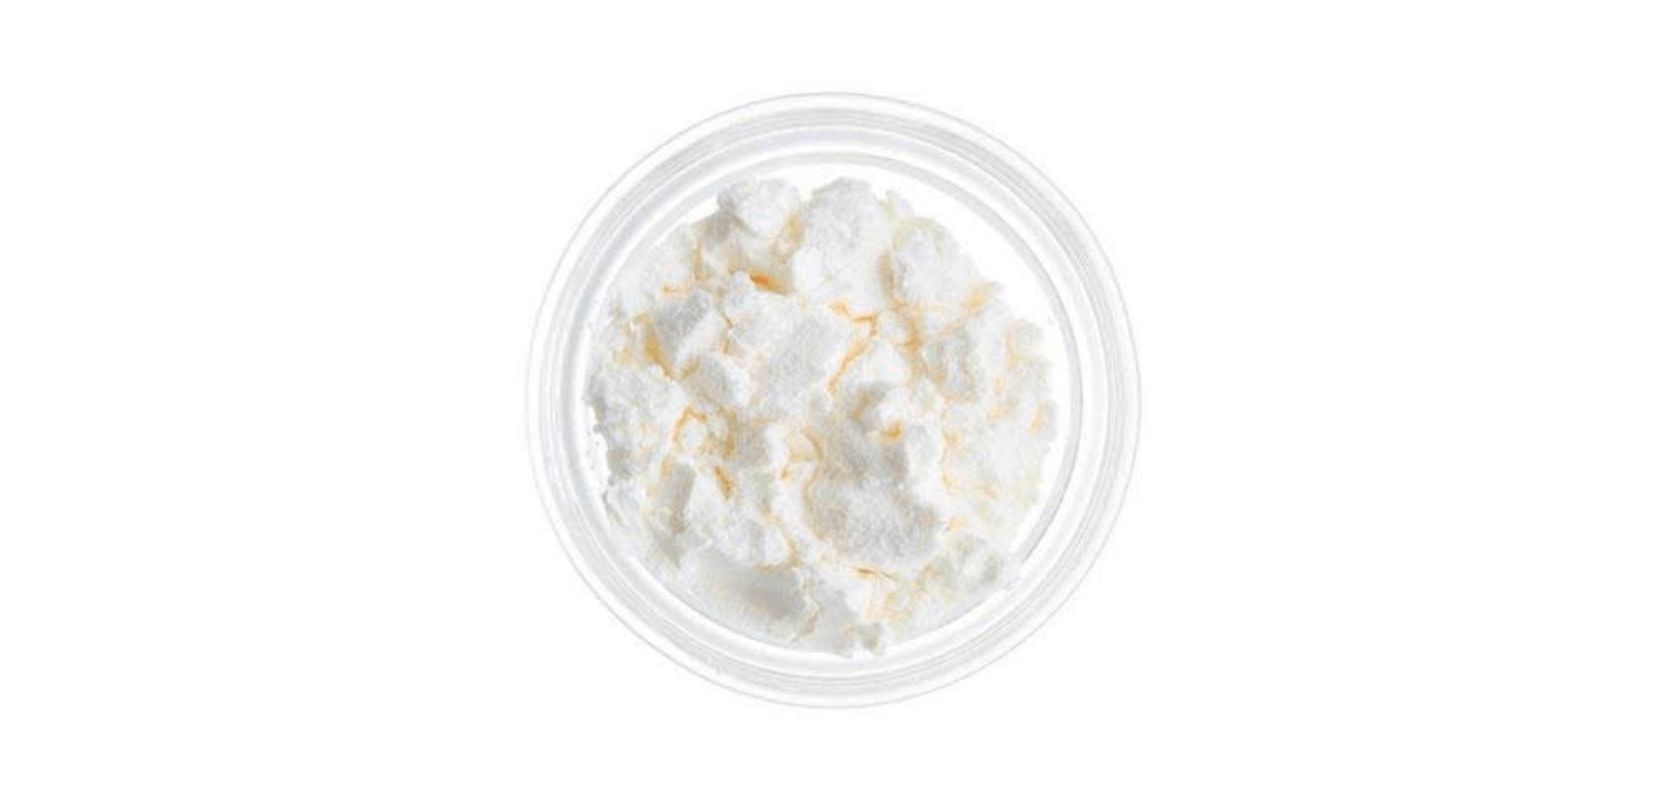 How do you purchase the best CBD isolate in Canada? With this guide, it’s as easy as 1,2,3!